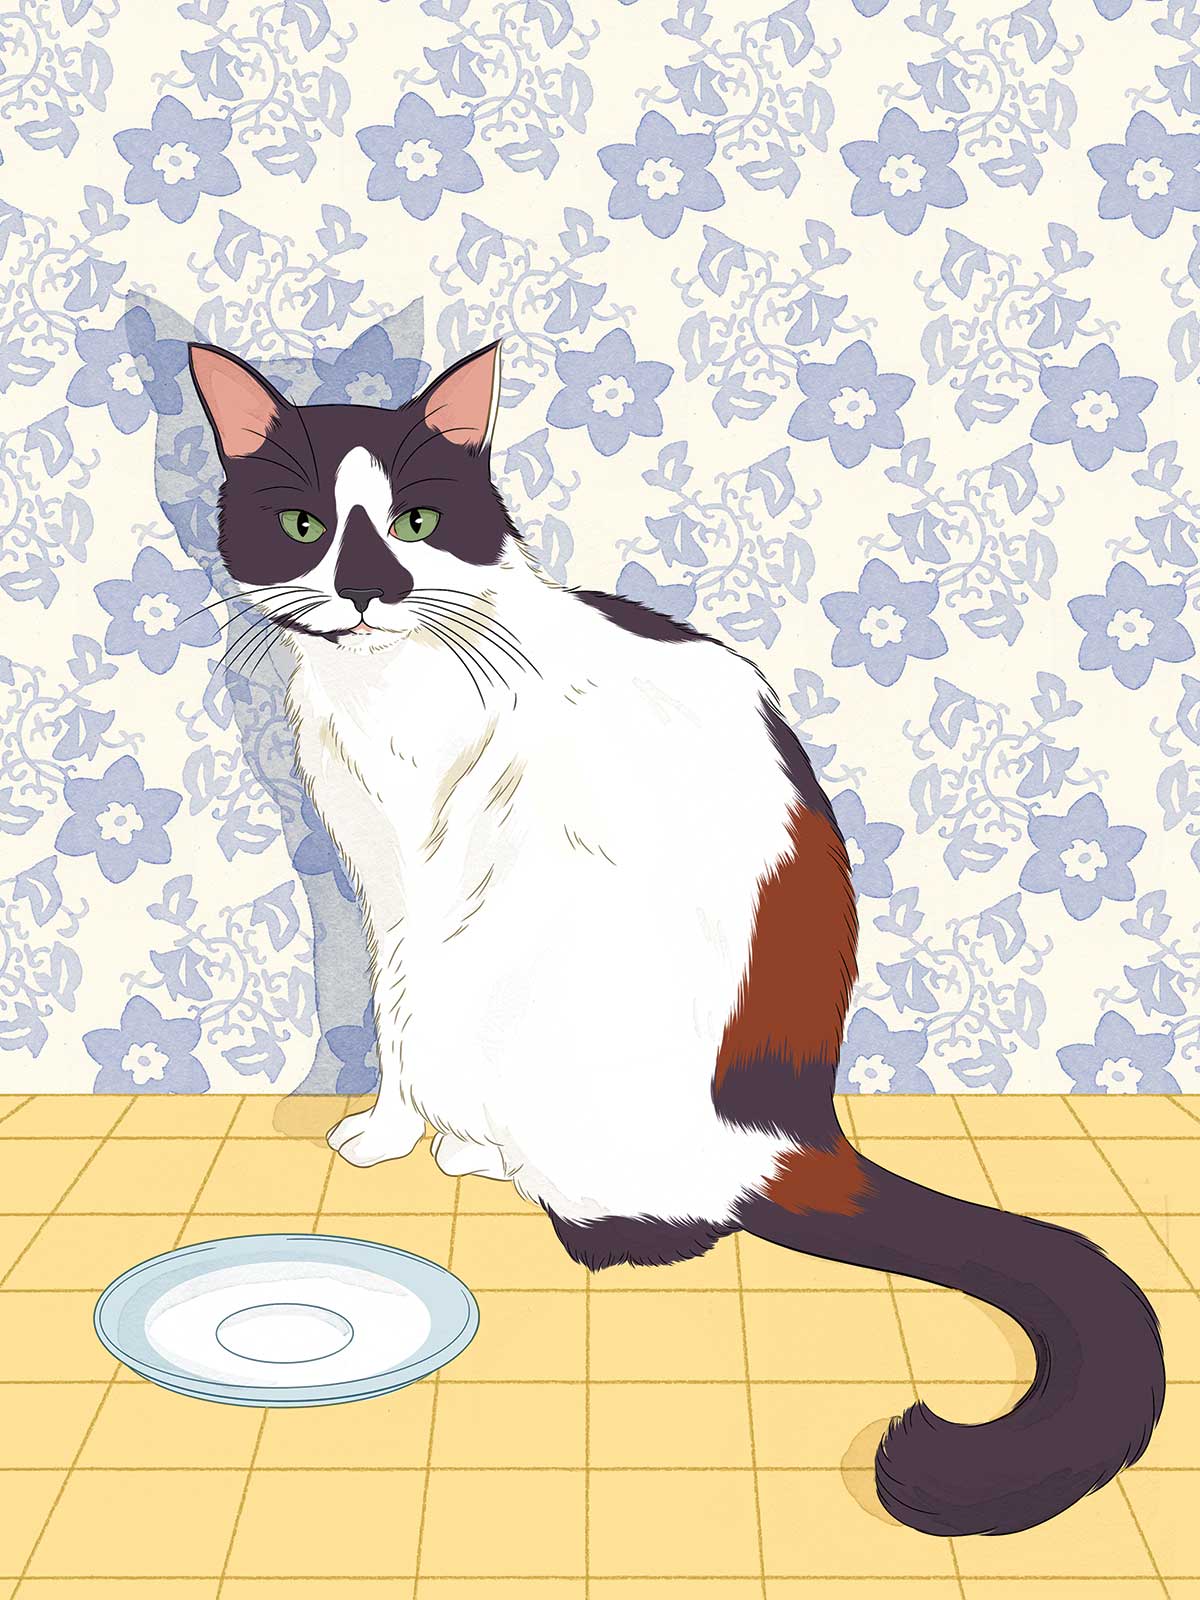 calico cat with empty saucer